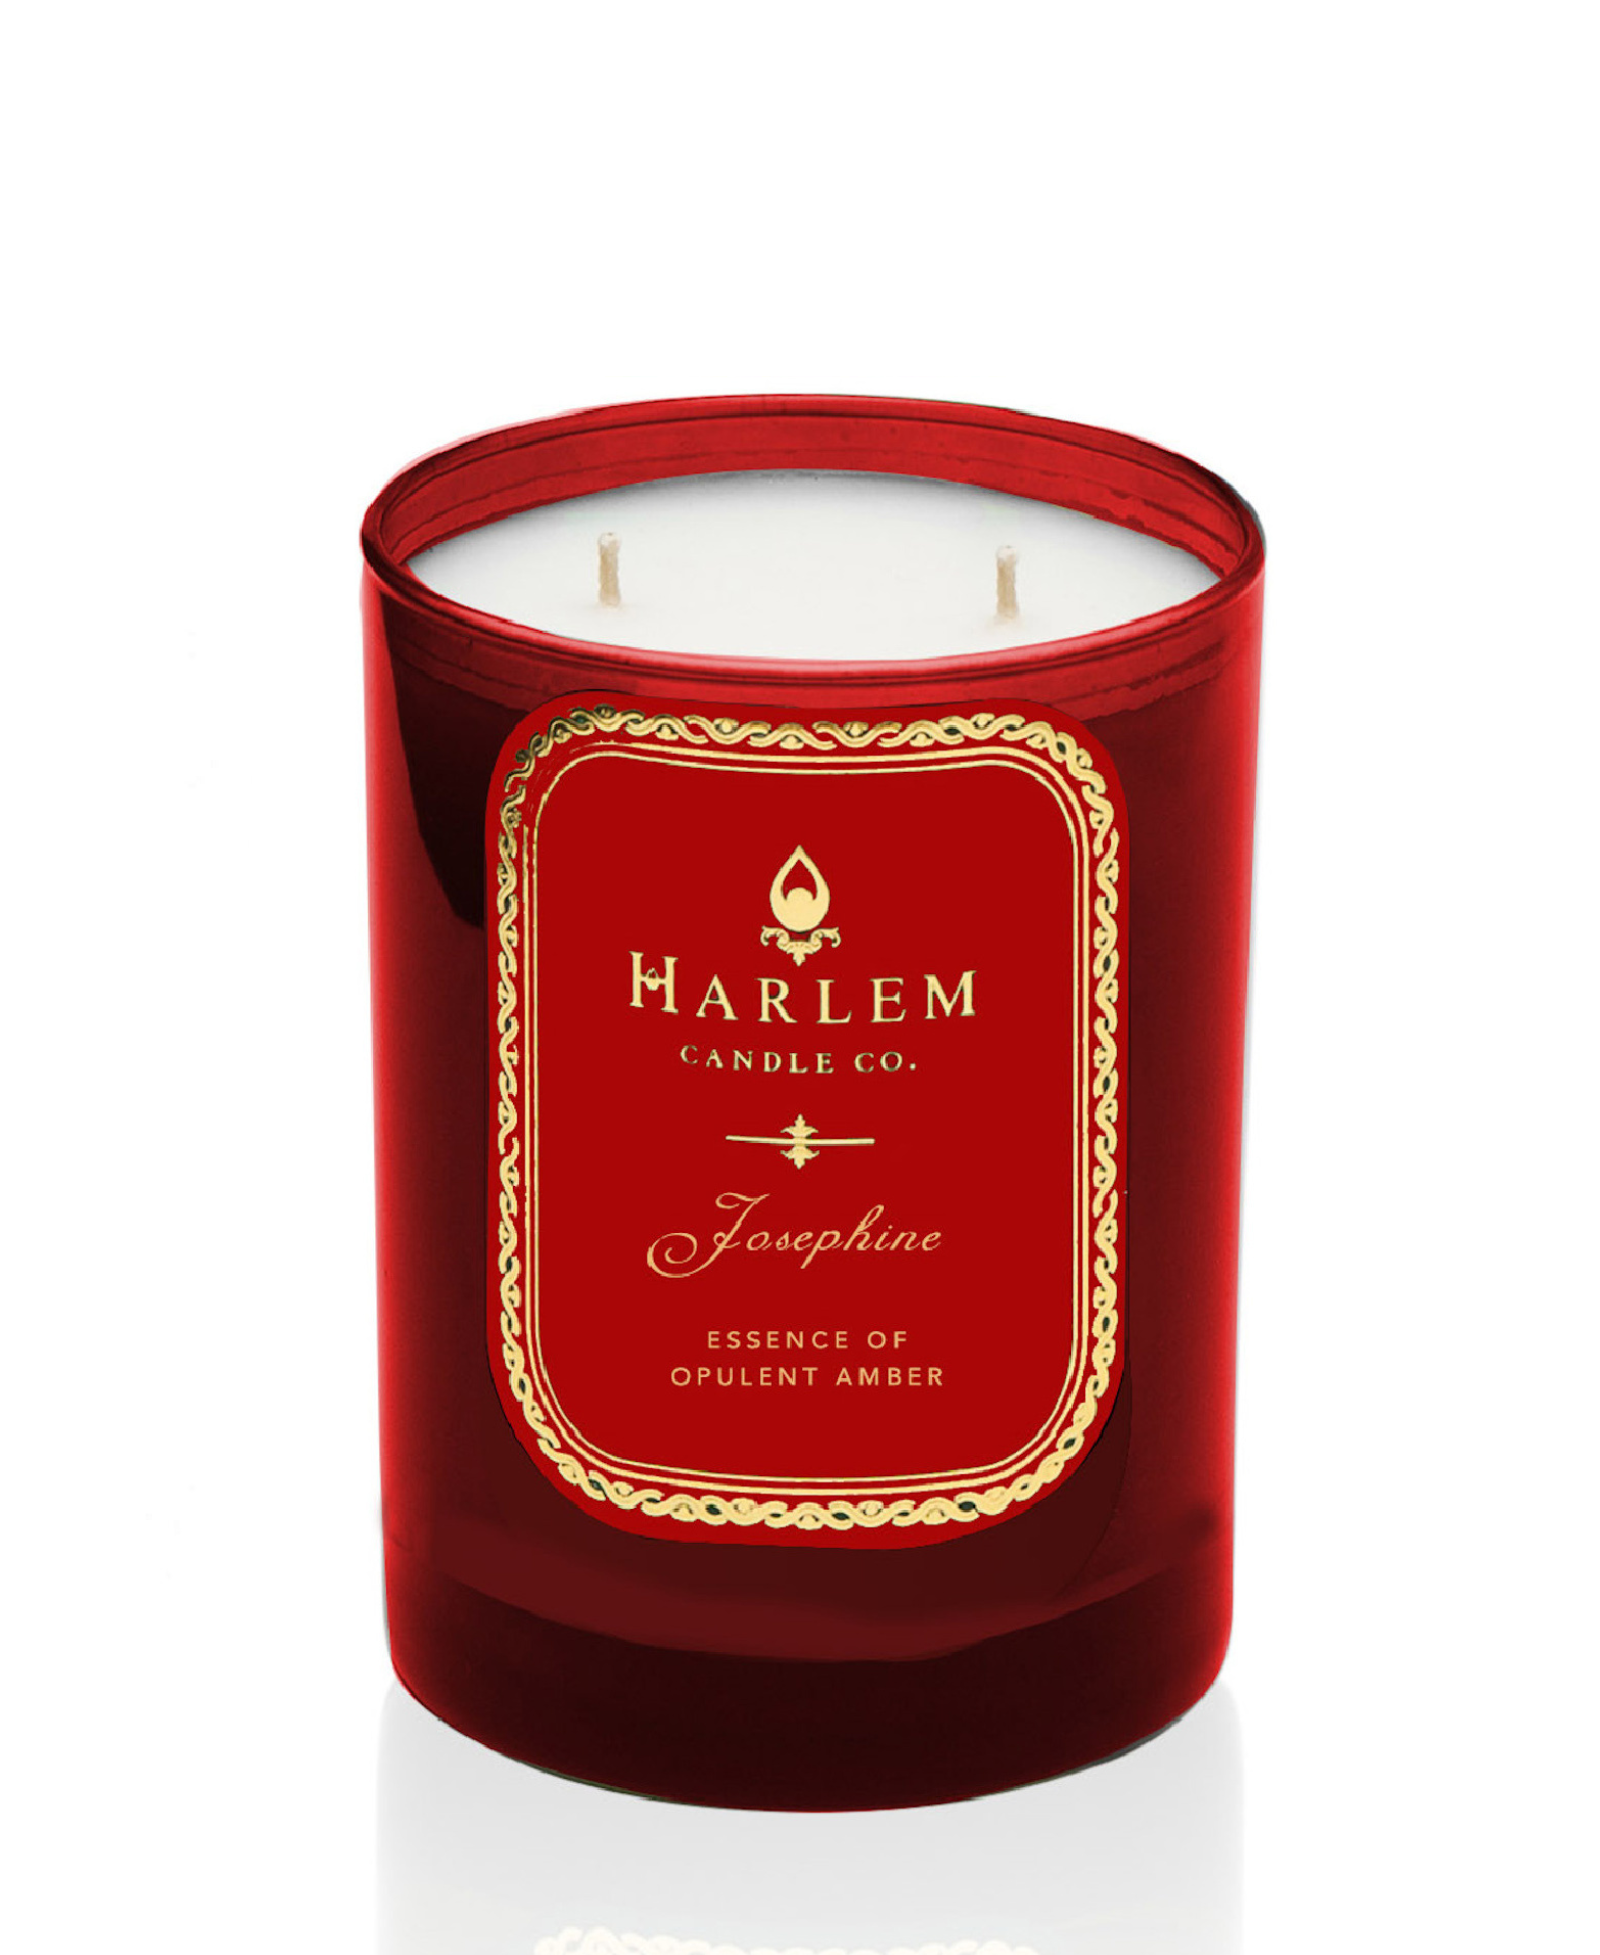 This is an image of our Josephine candle, with two weeks in a red glass with a gold and red label.